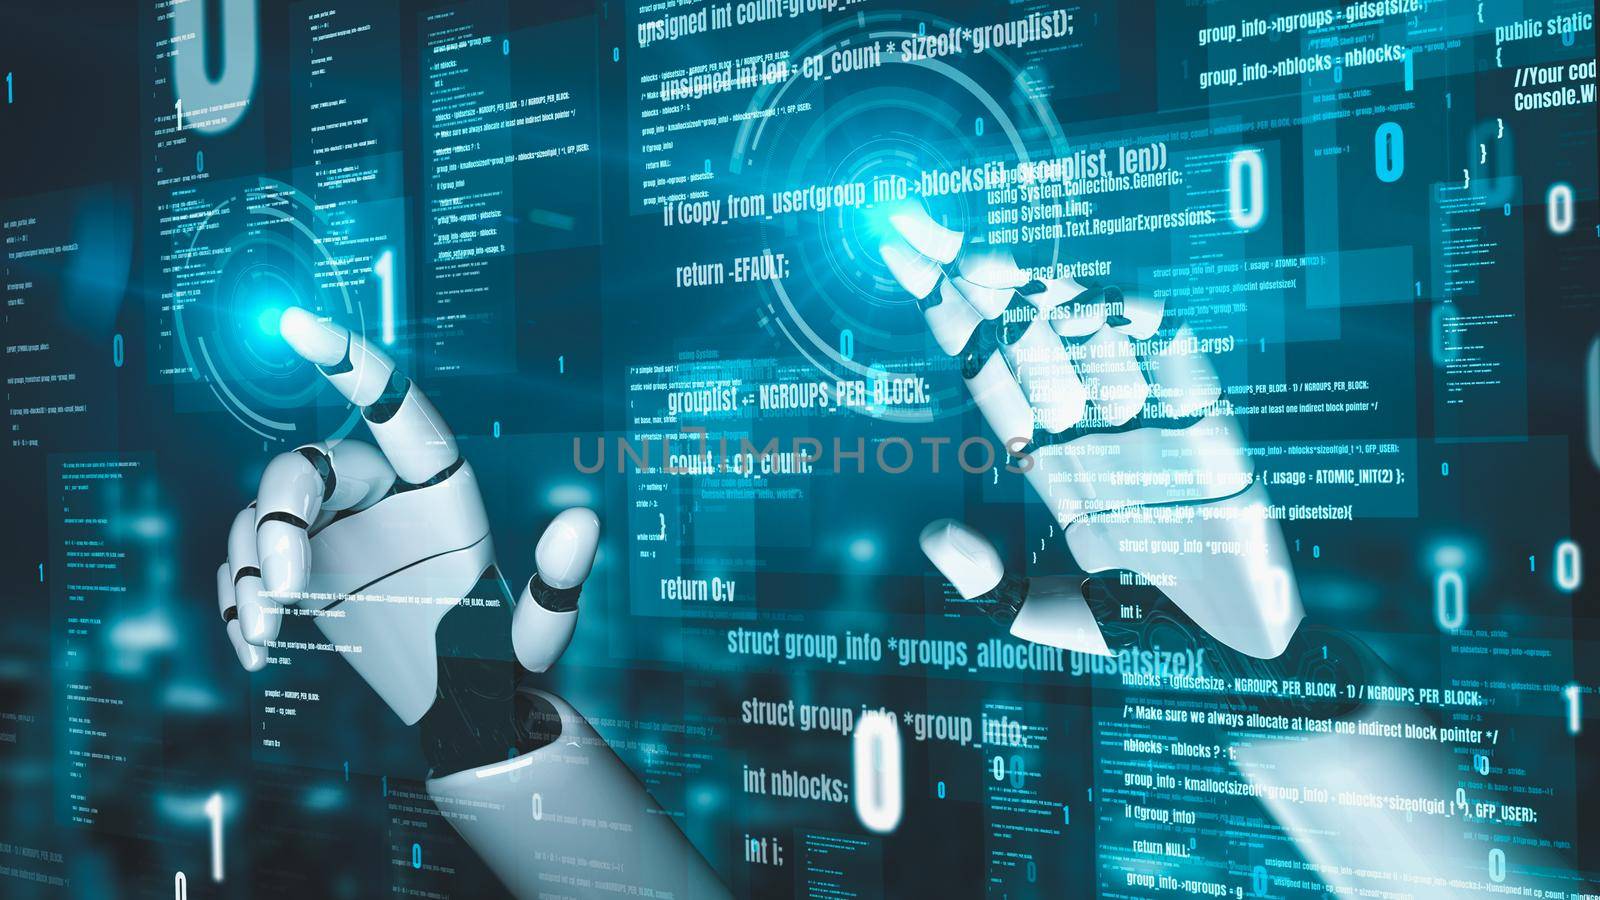 Futuristic robot artificial intelligence enlightening AI technology development and machine learning concept. Global robotic bionic science research for future of human life. 3D rendering graphic.